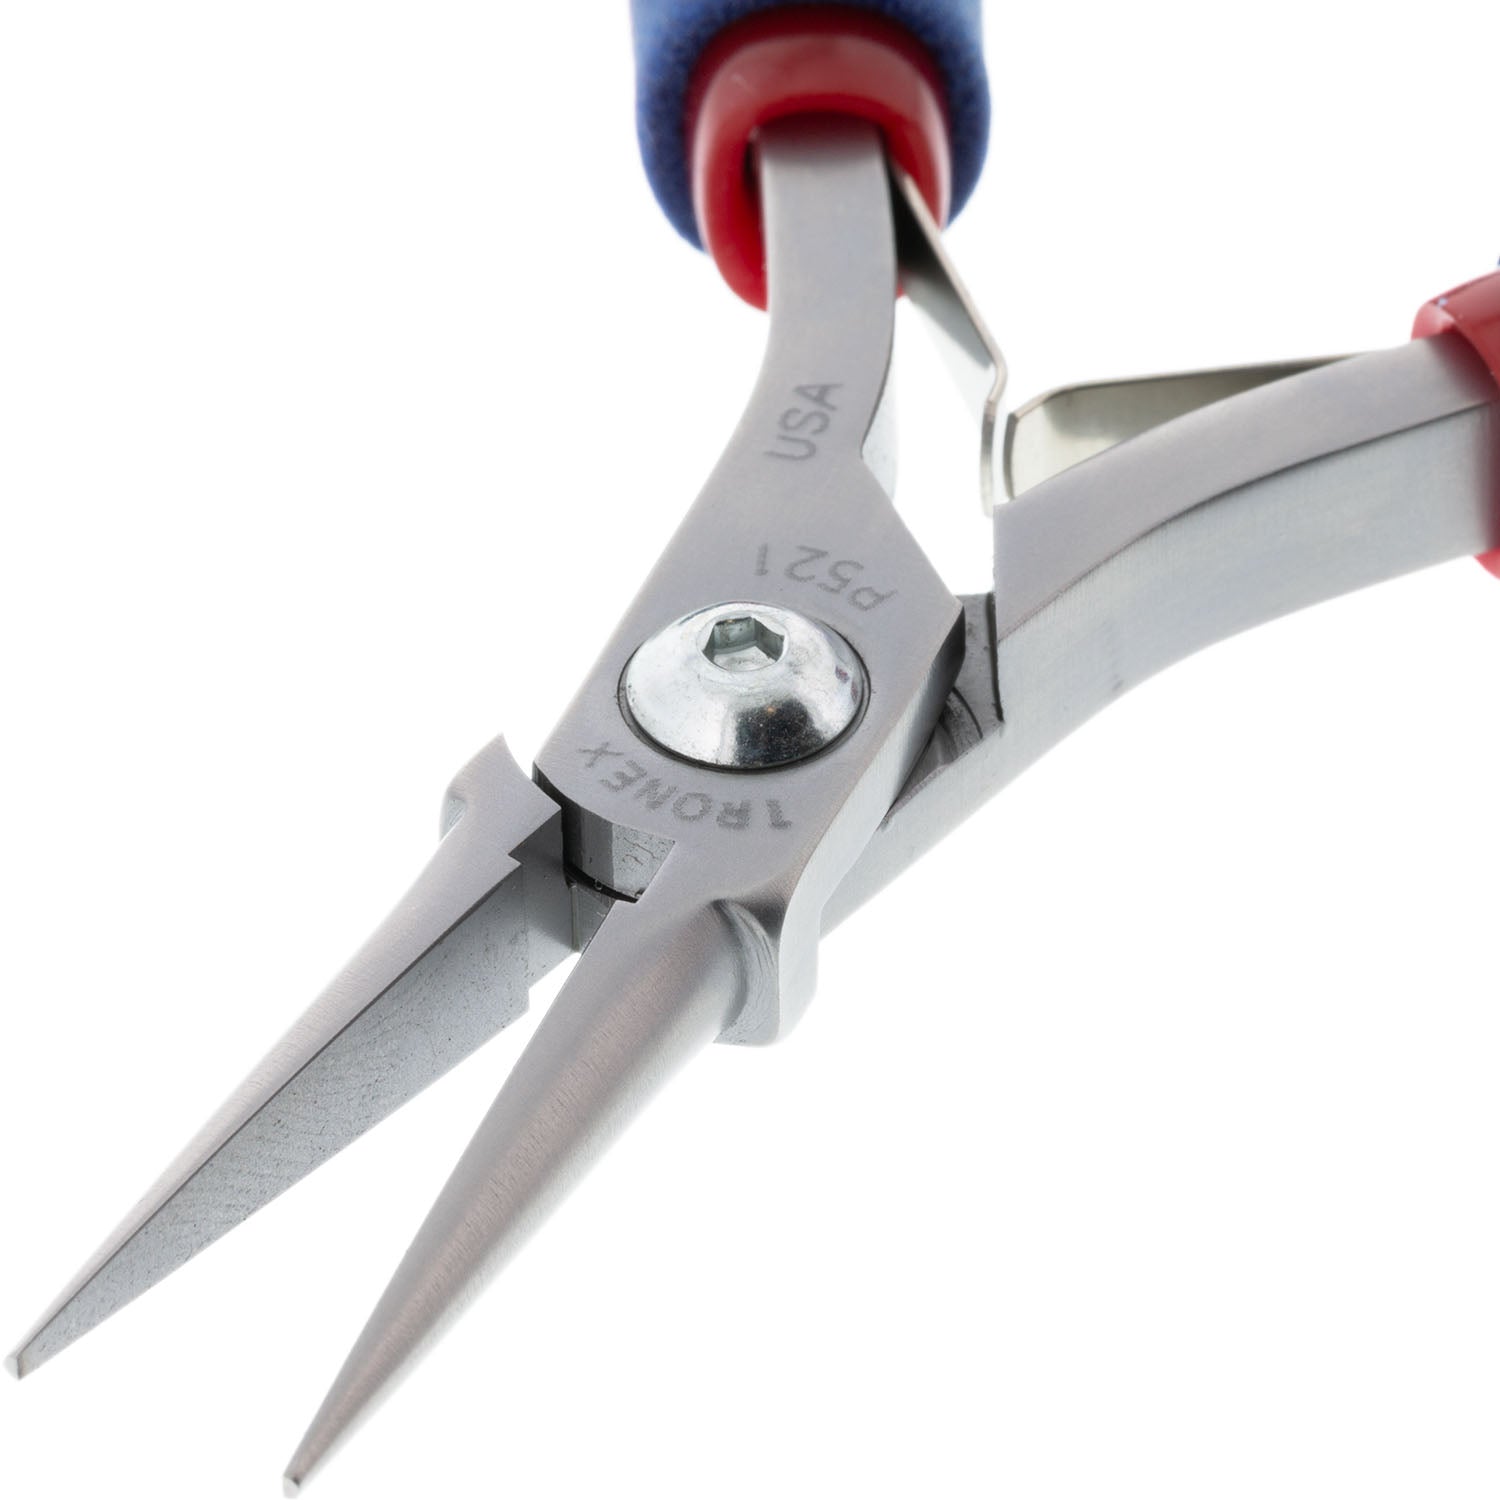 Orion Grounded Precision Plier for Permanent Jewelry